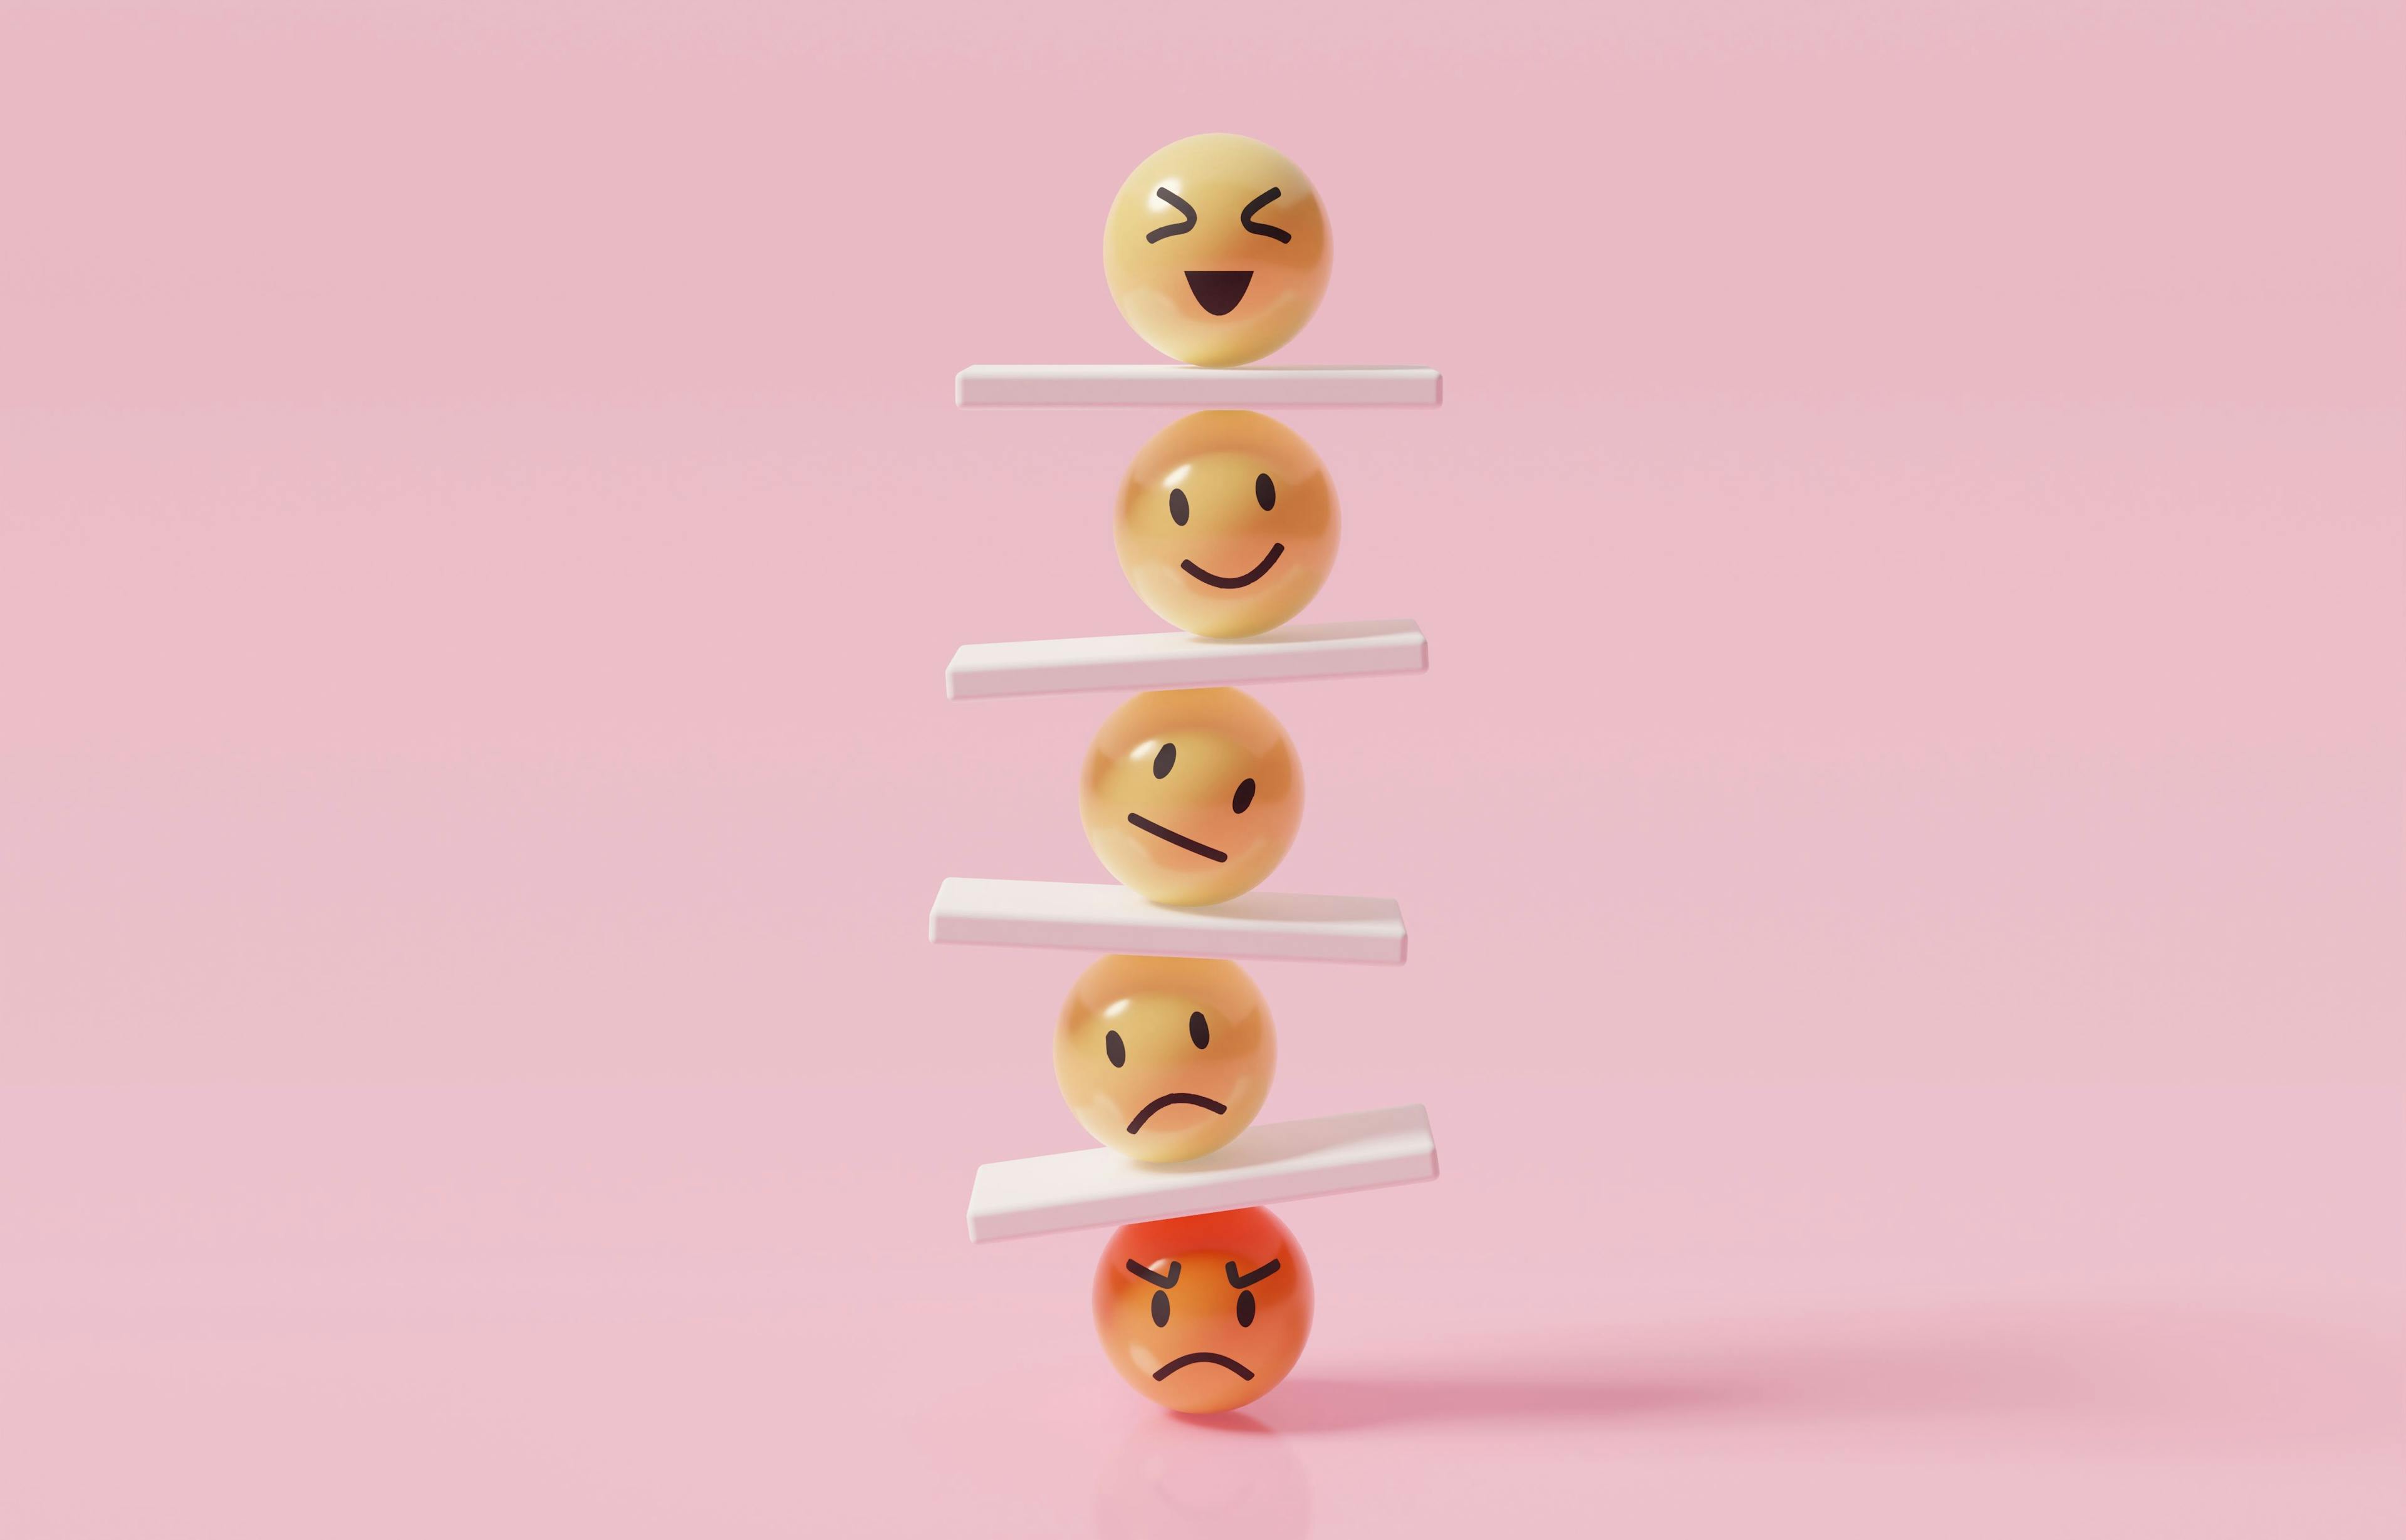 A stack of five 3-D emoticons showing various emotions, balanced on each other with white slabs in between.